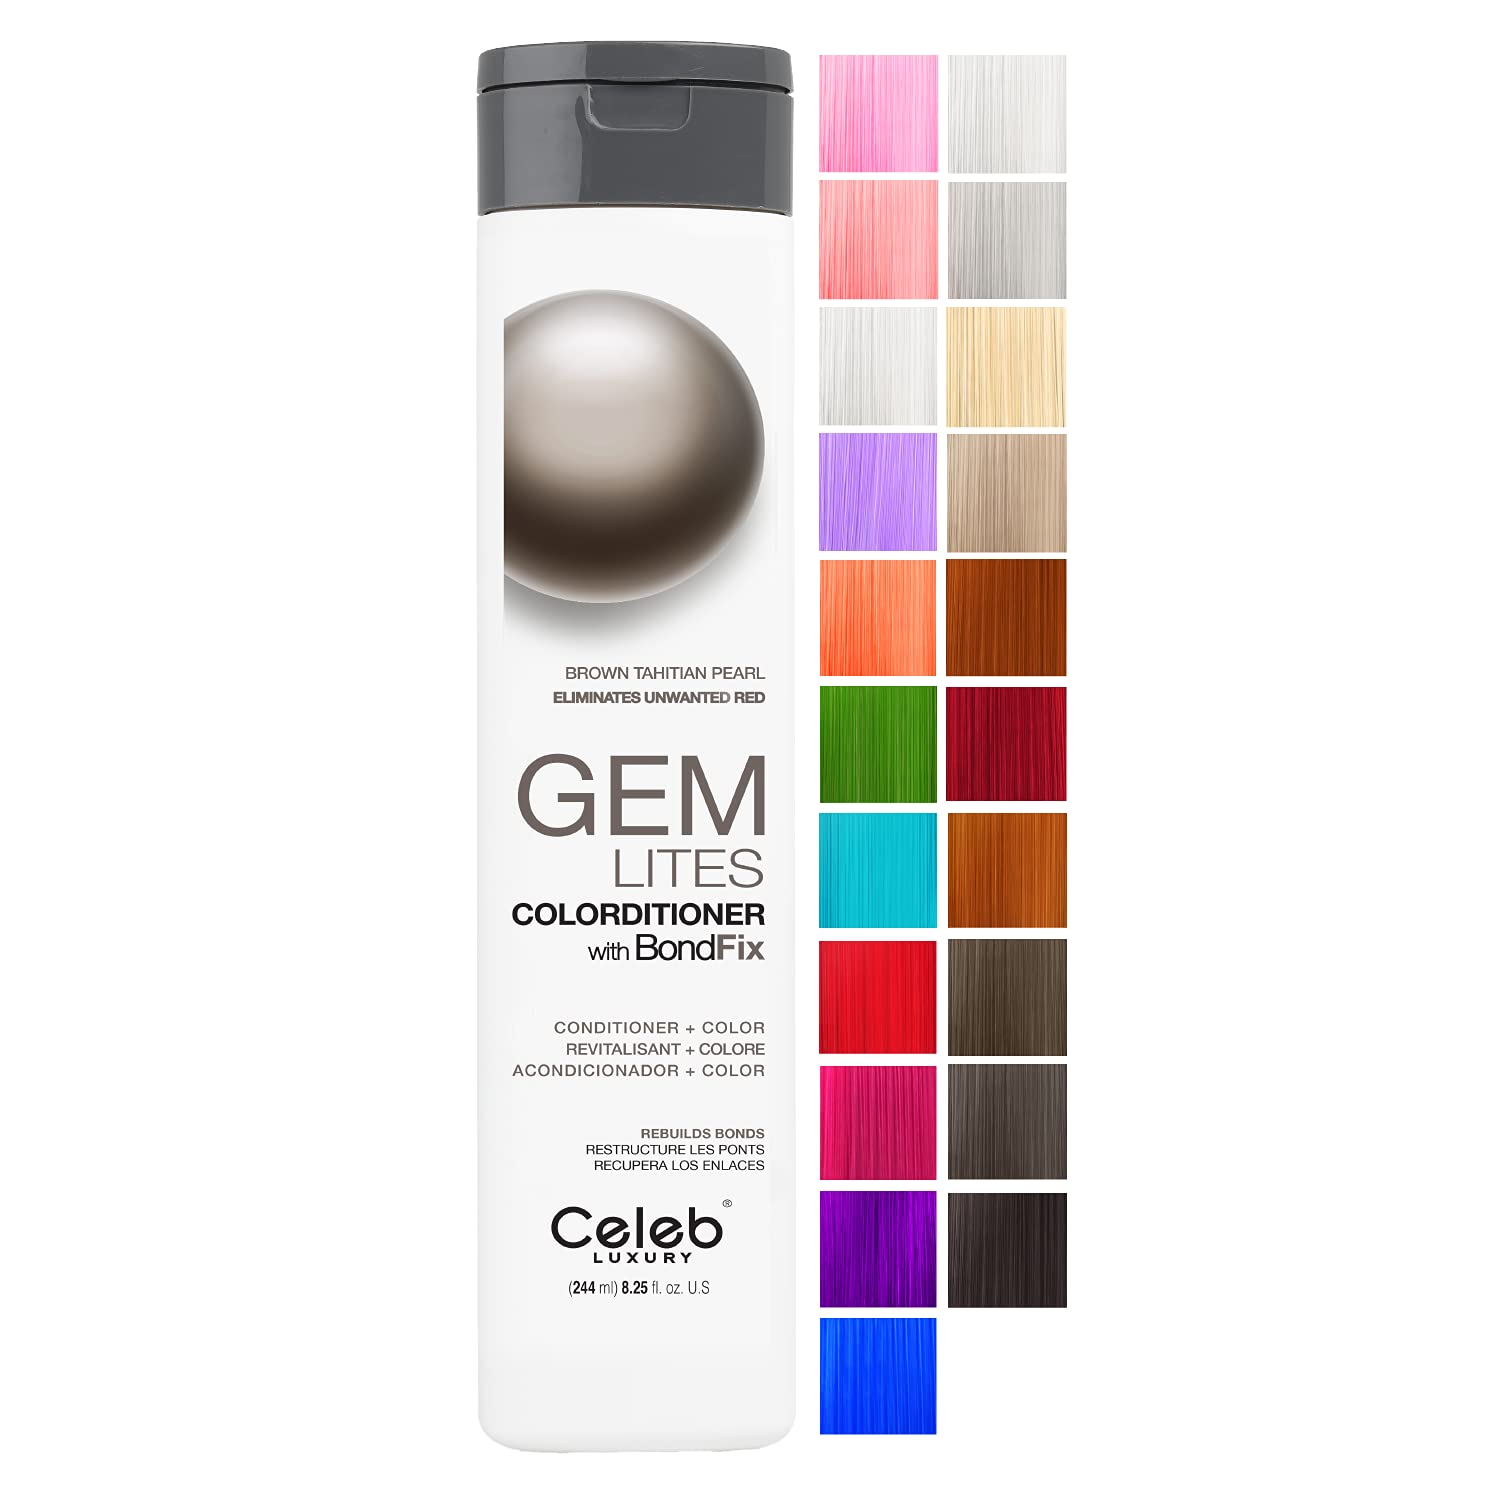 Celeb Luxury Gem Lites Brown Tahitian Pearl Colorditioner, Color Depositing Conditioner with Bondfix Bond Rebuilder, Semi Permanent Hair Colour Glaze, Removes Unwanted Warmth in Brunettes